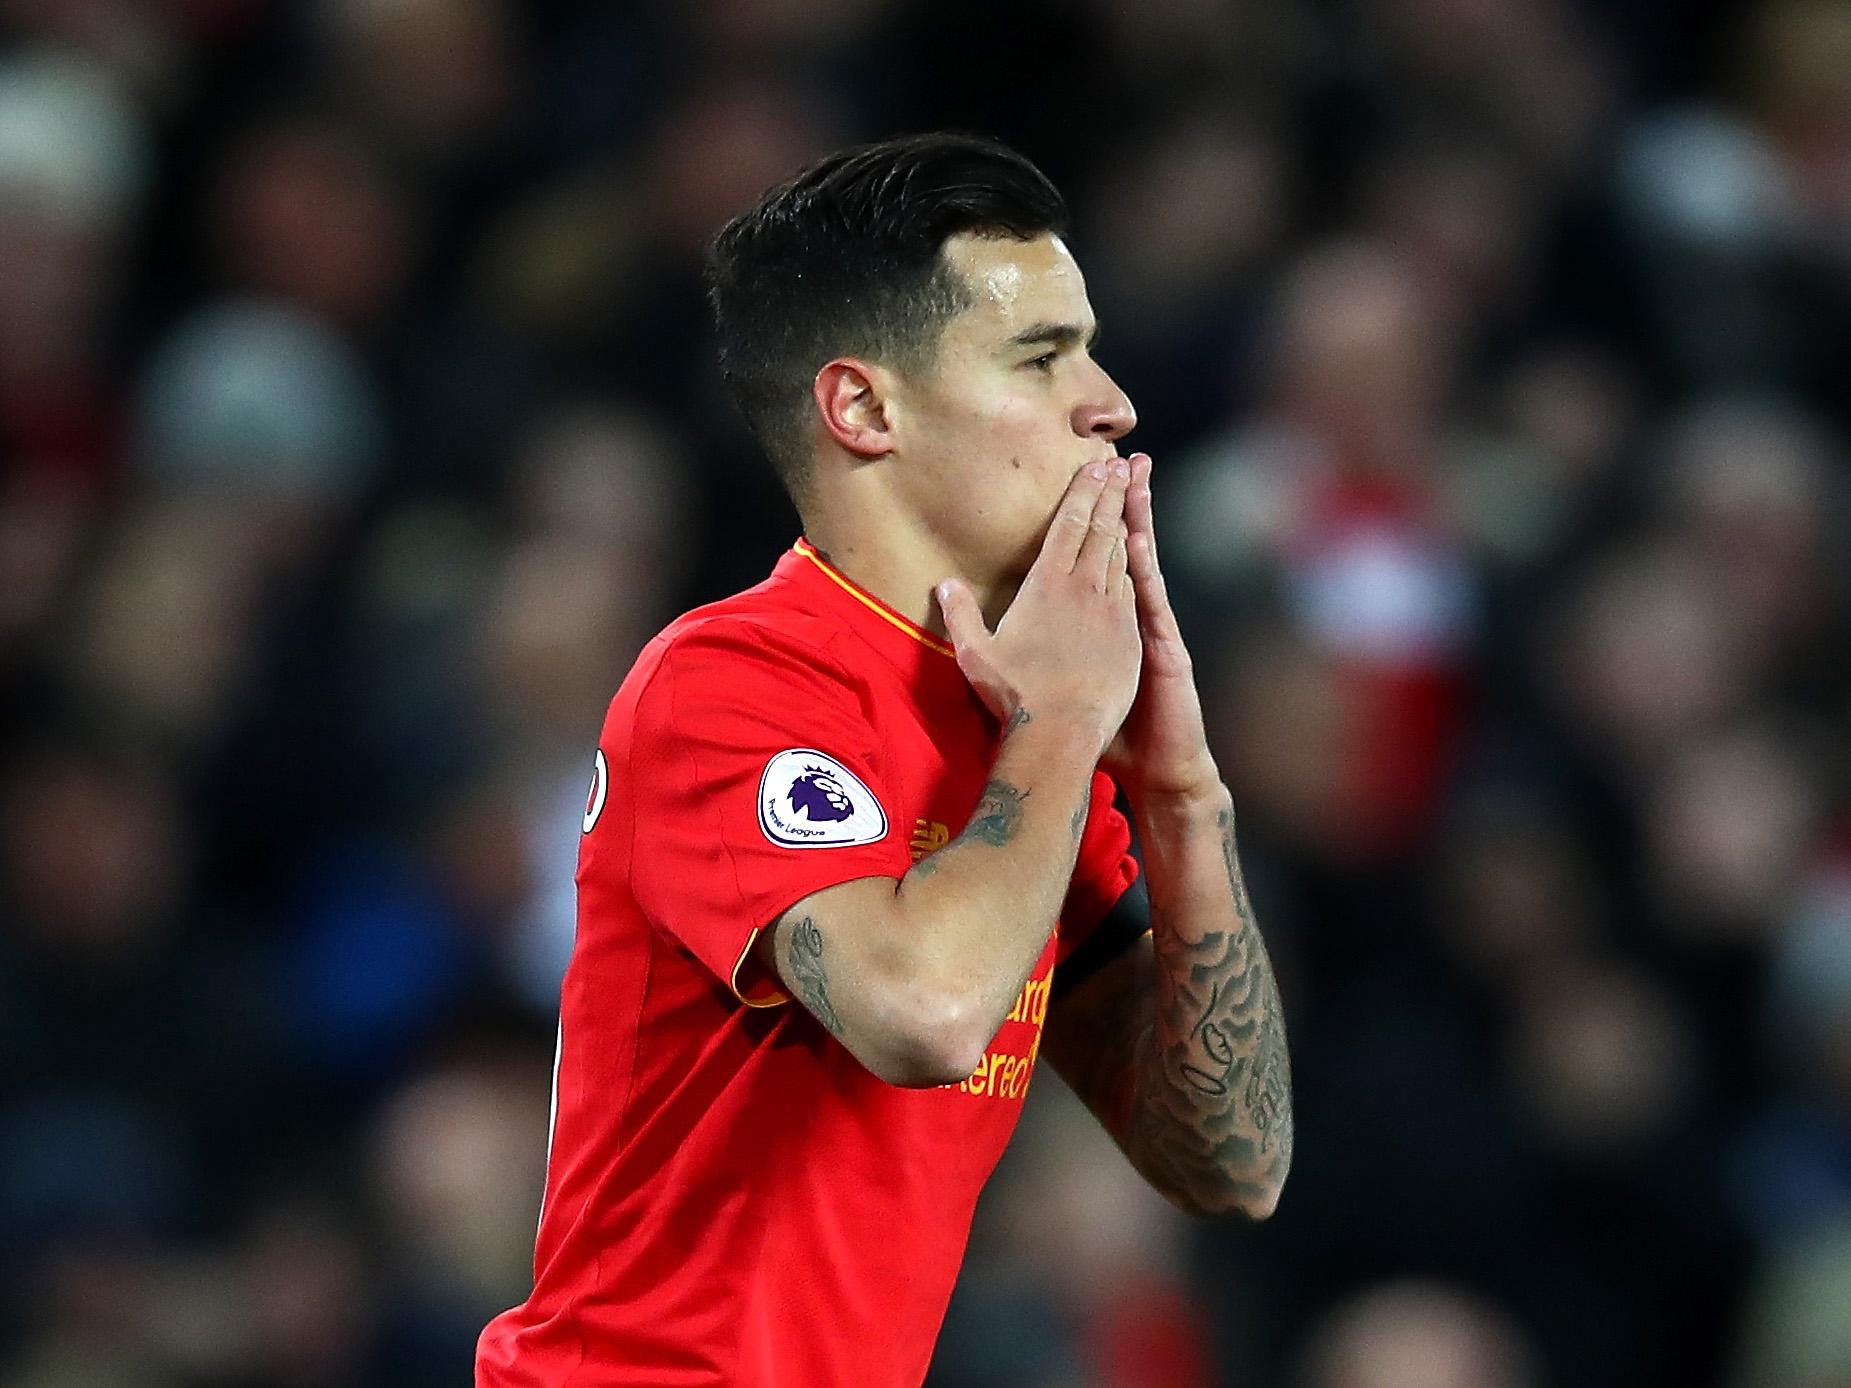 Barcelona had a second bid rejected for Philippe Coutinho last week